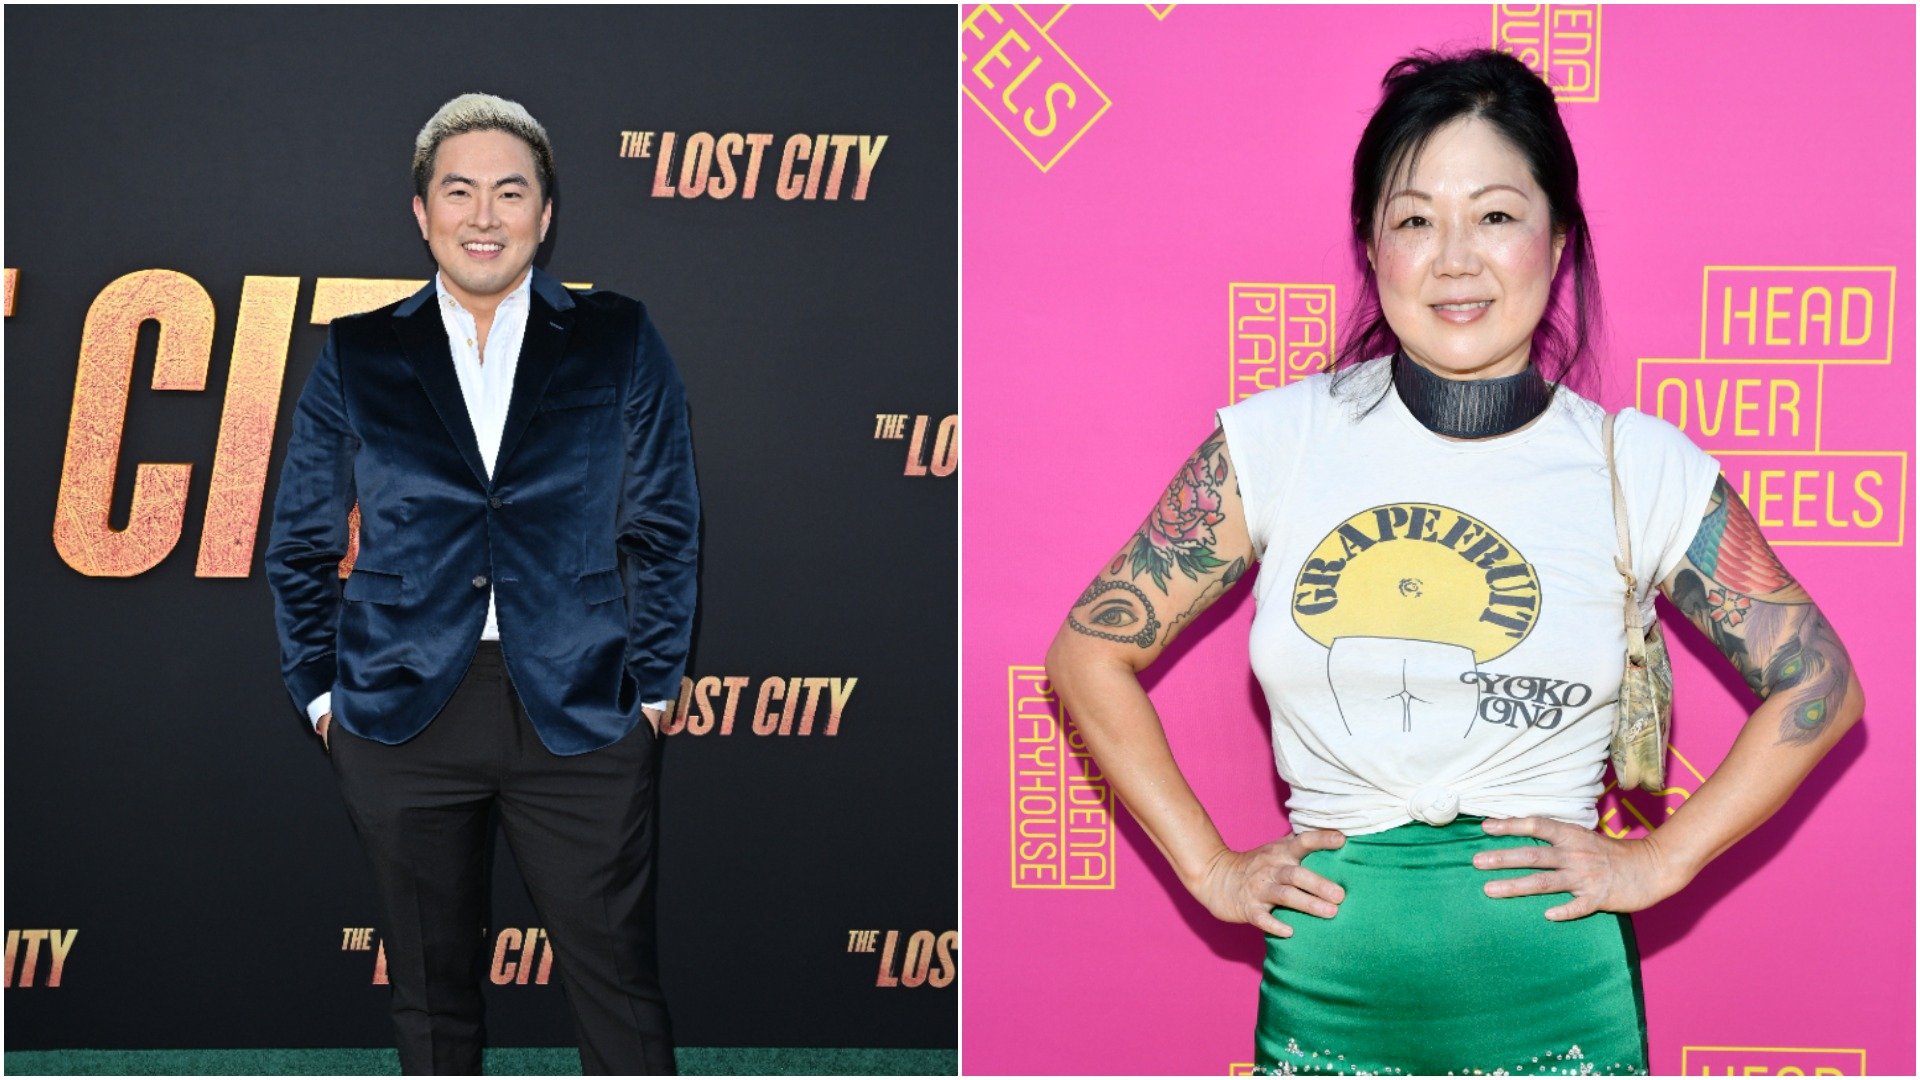 Bowen Yang from 'SNL' walks the red carpet and smiles. In a separate event, Margaret Cho smiles for cameras on the step and repeat. 